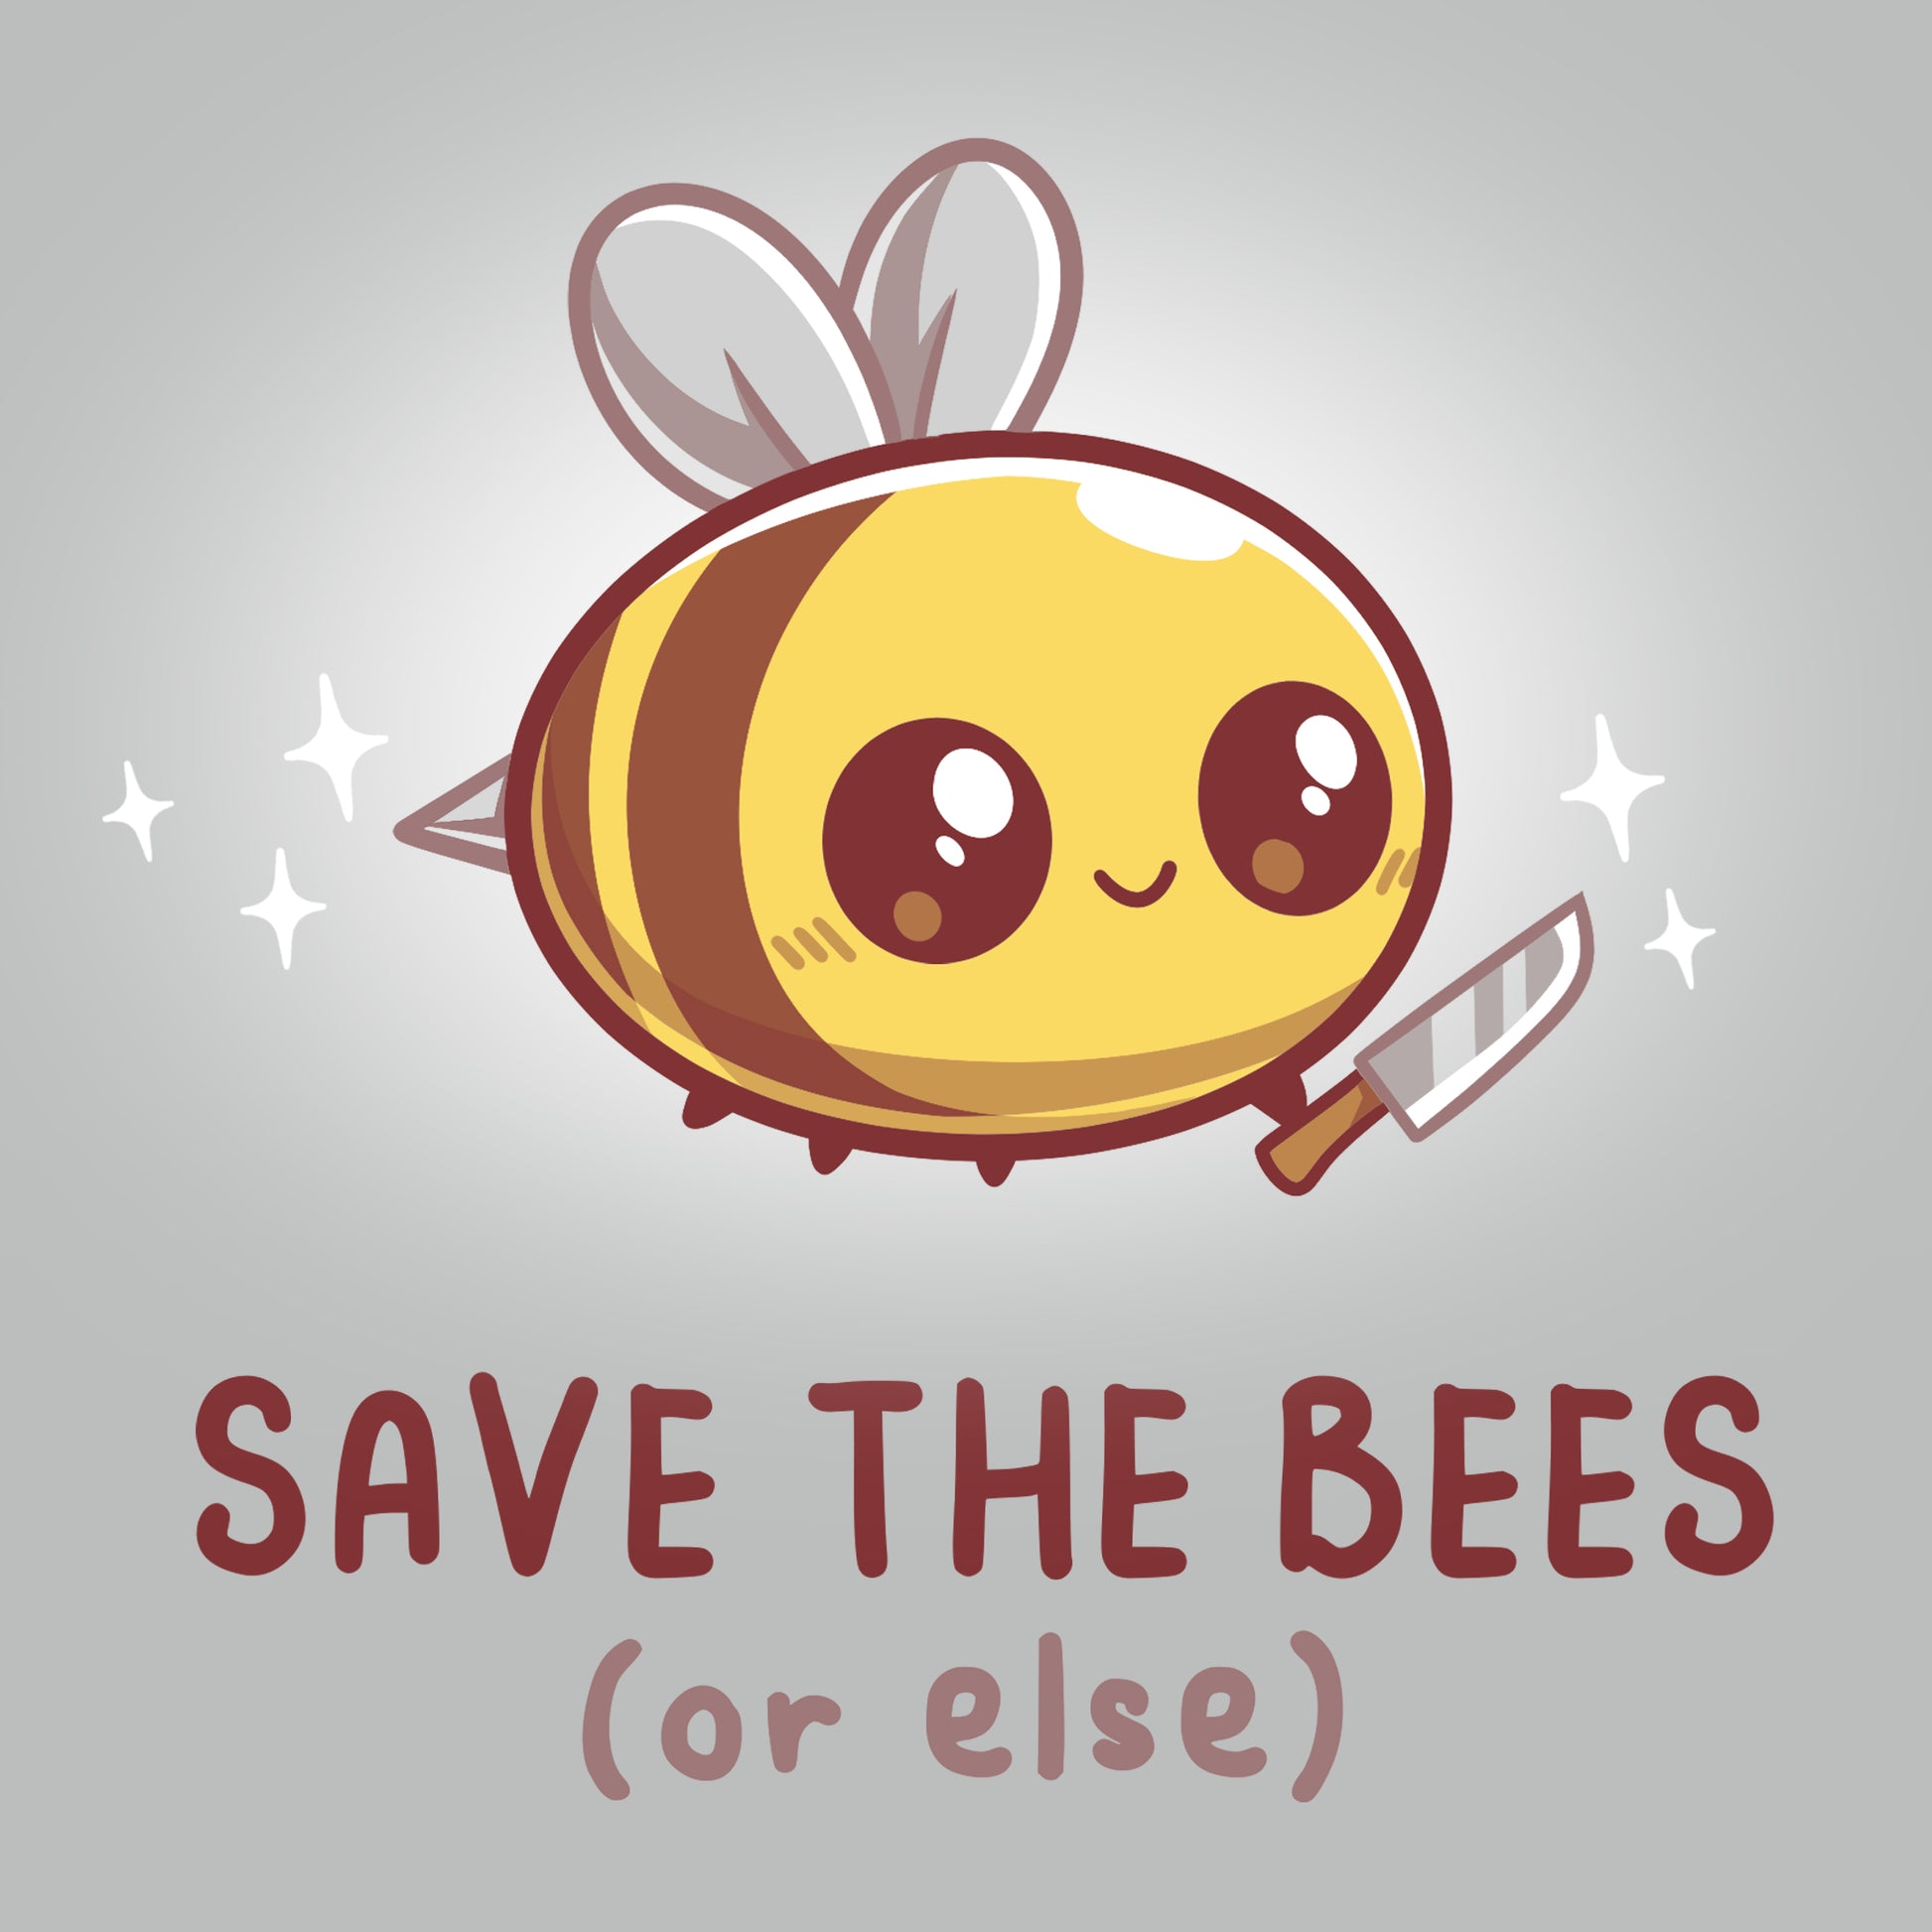 Save the bees with a TeeTurtle "Save The Bees (or else)" t-shirt.